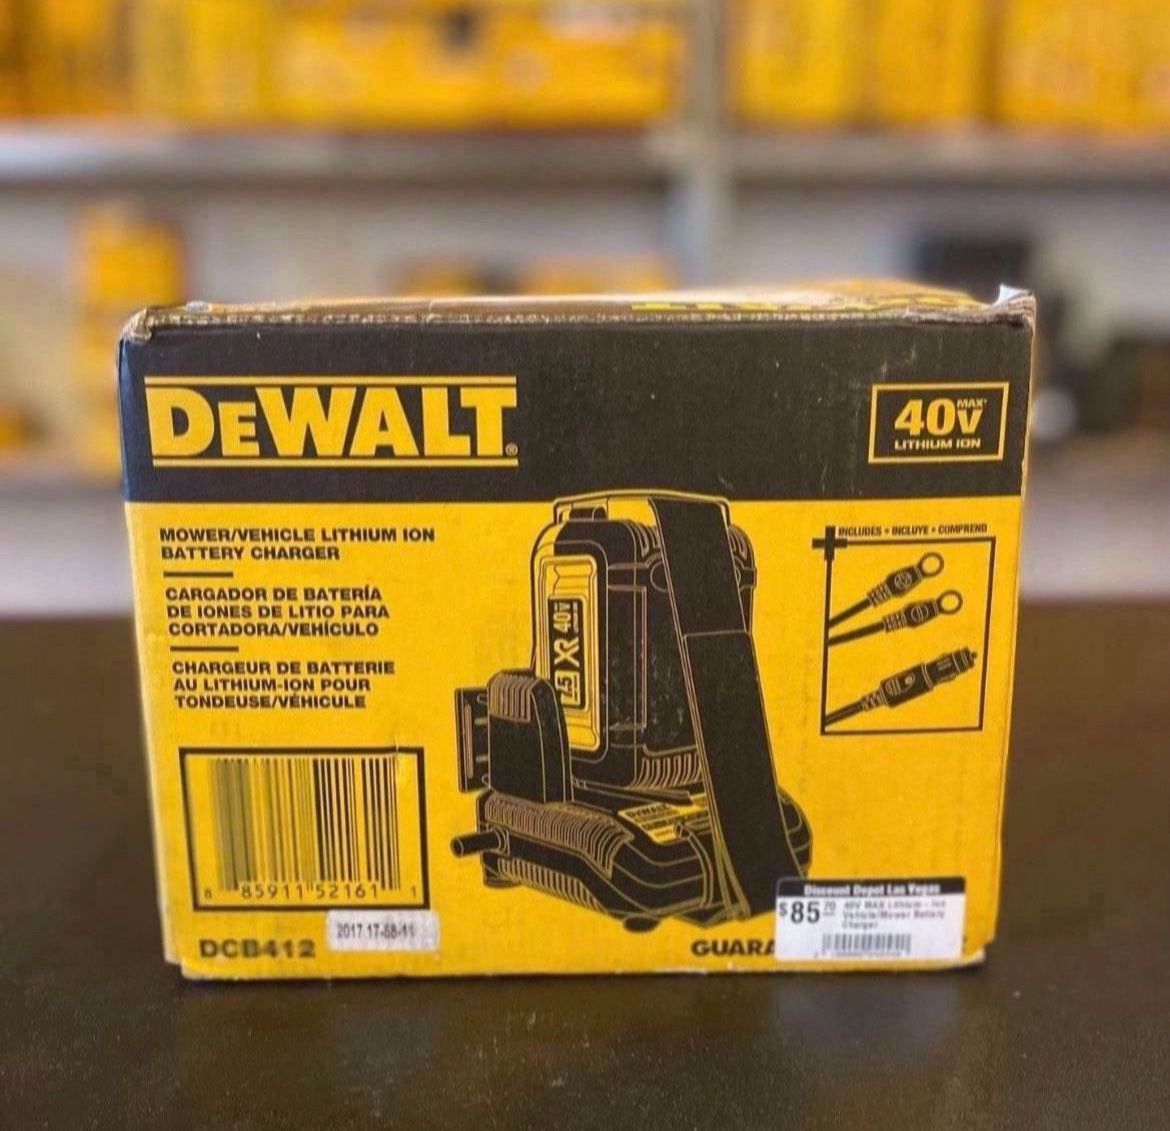 DEWALT 40V MAX Lithium-Ion Vehicle/Mower Battery Charger DCB412